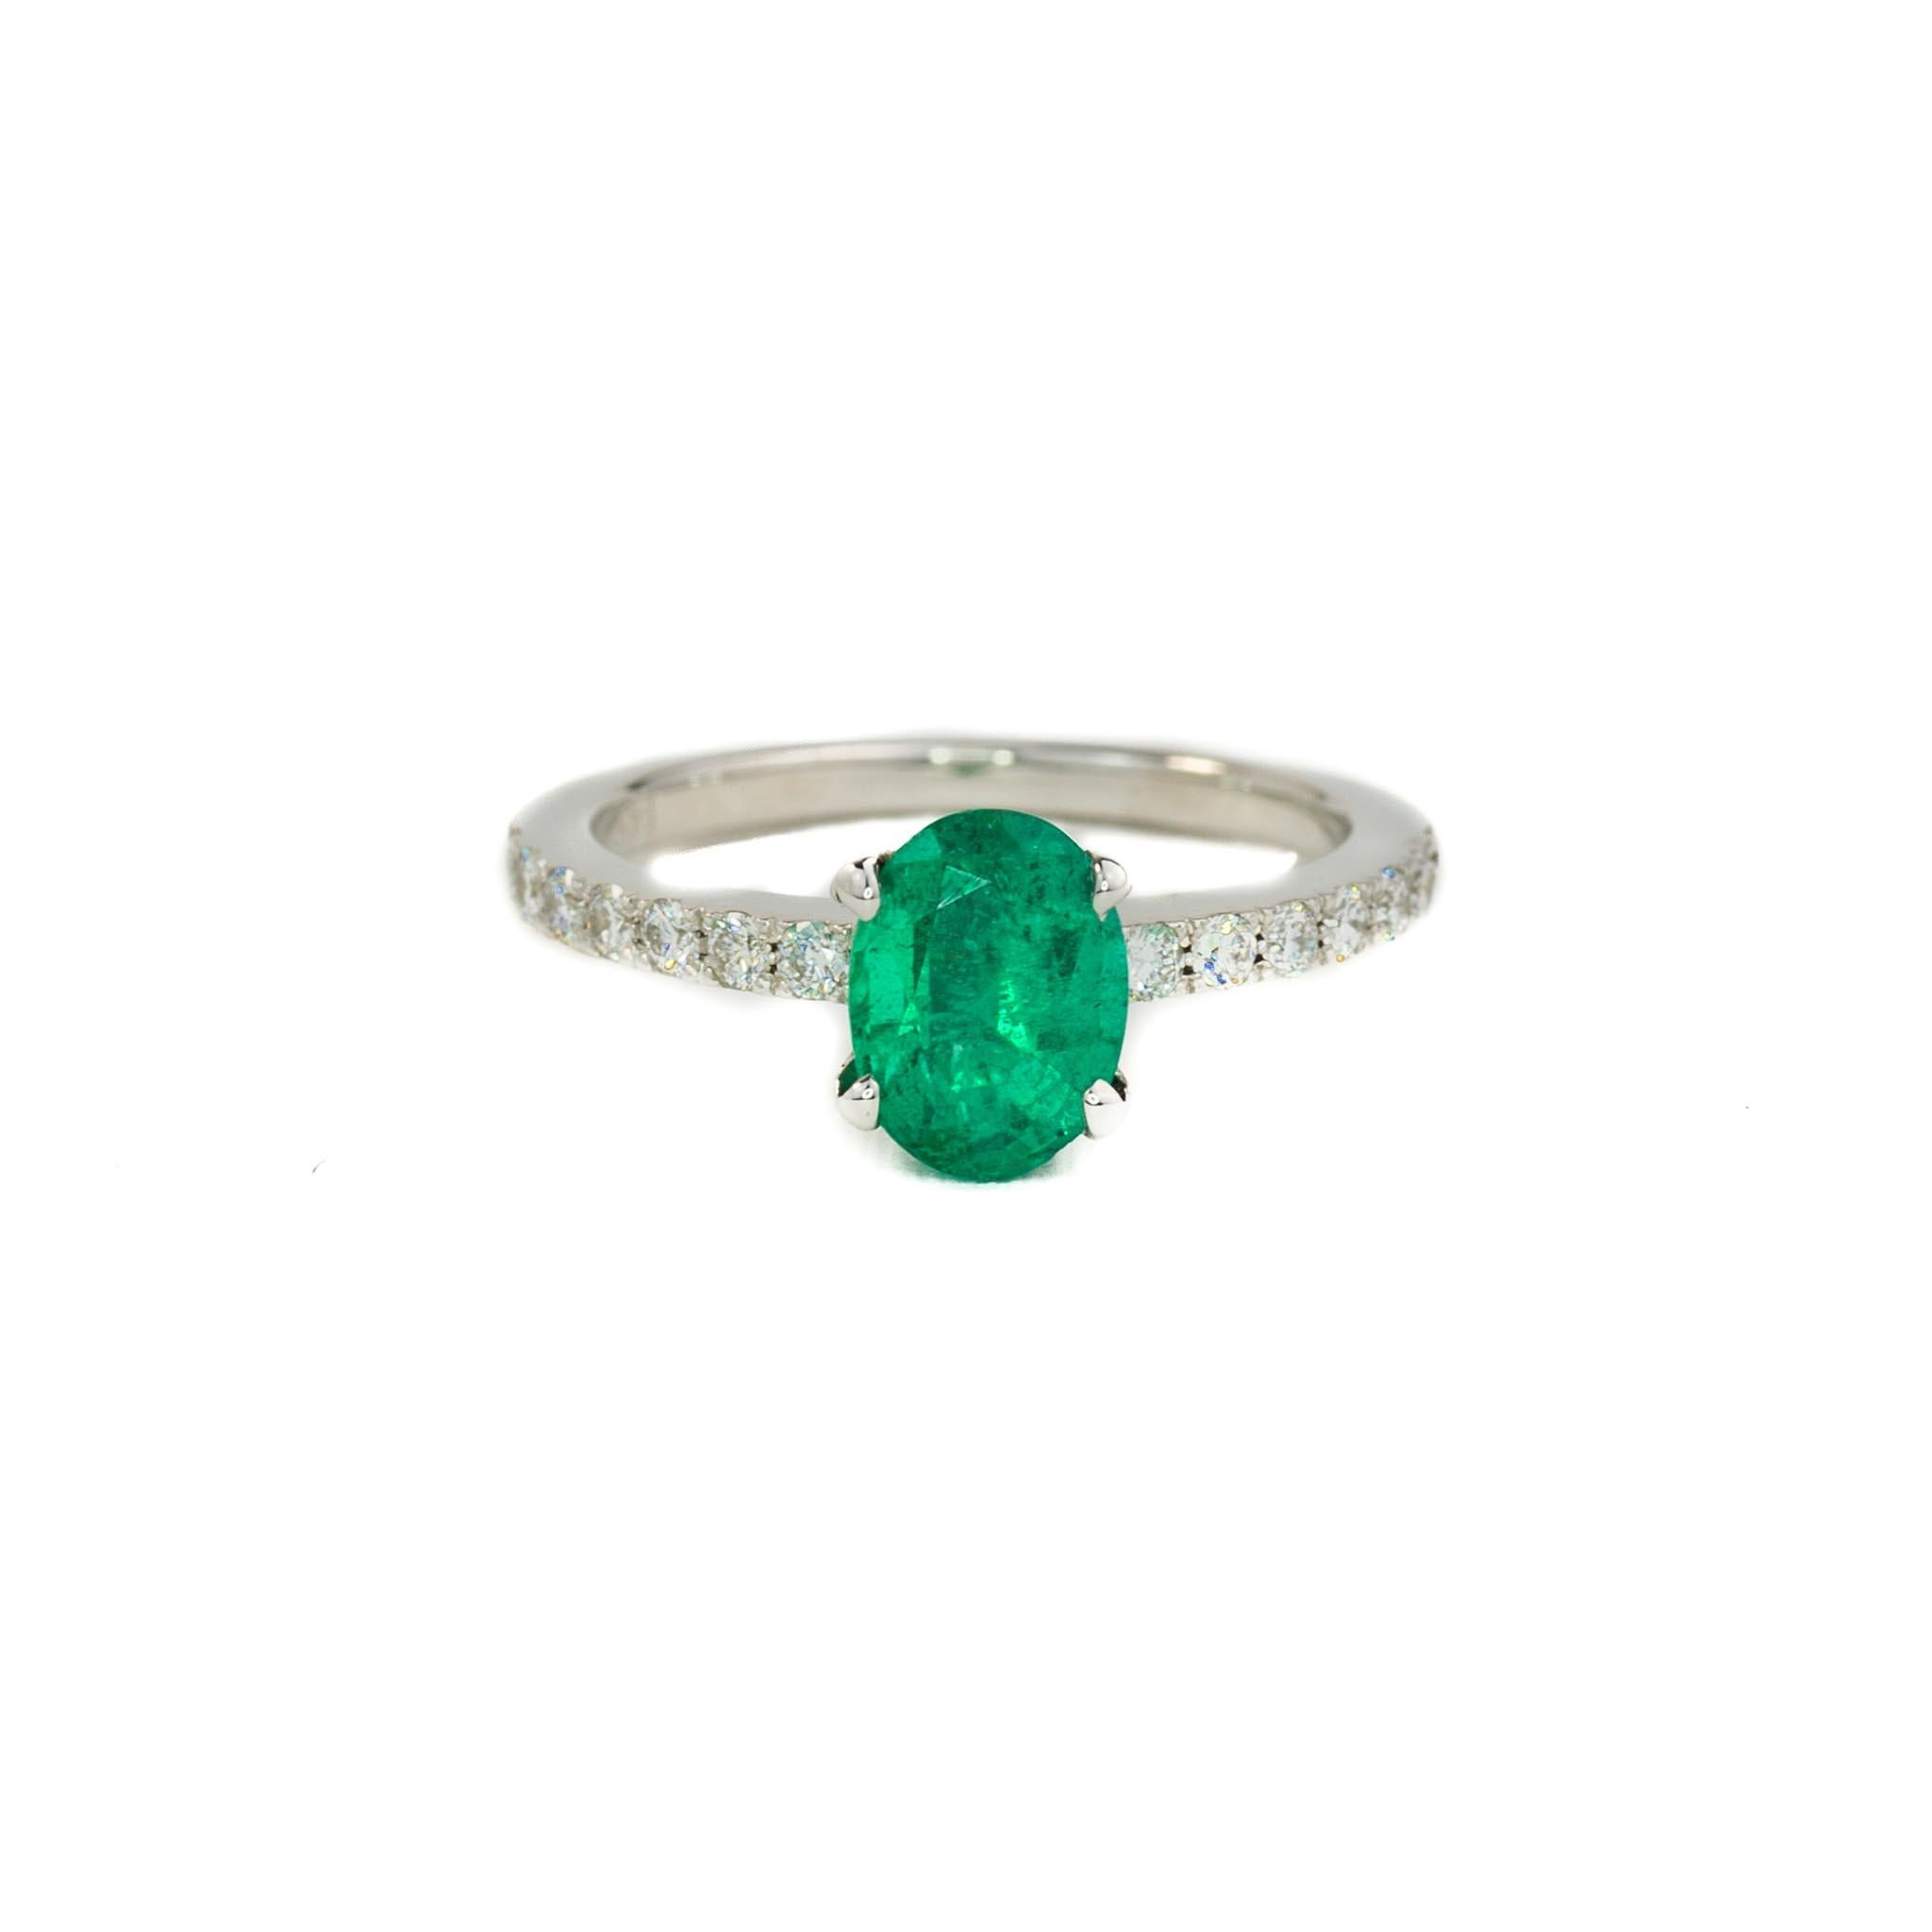 The simple band of diamonds highlight the natural green color.

Oval design rings are the perfect shape for slender fingers.

This is a custom made ring and will take 1-2 weeks to complete.

Make your proposal unique and special for her with this